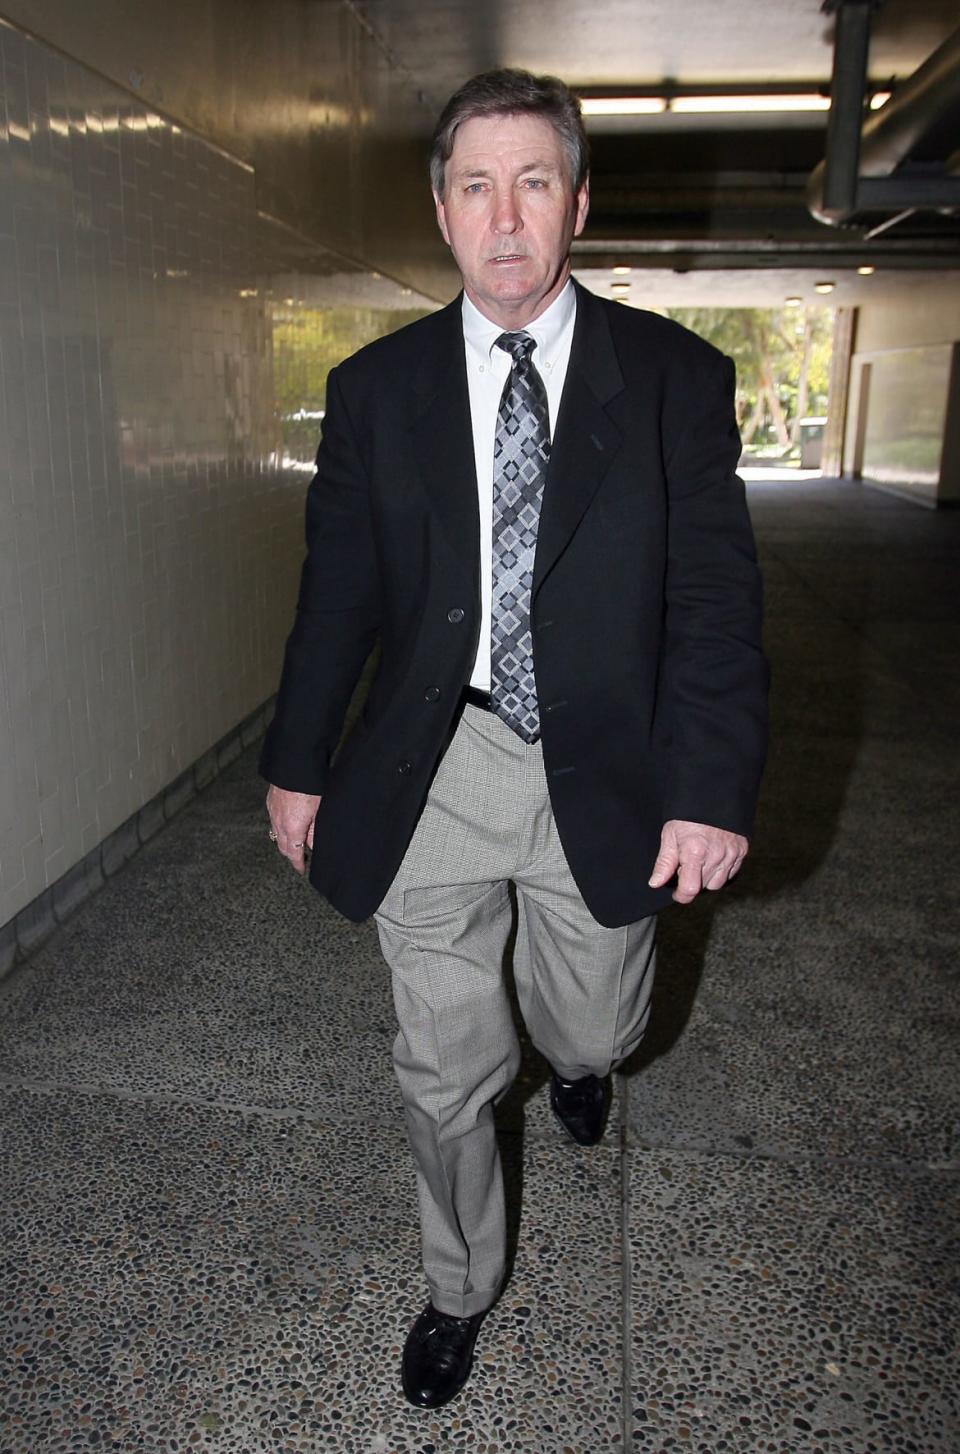 <div class="inline-image__caption"><p>Britney Spears' father, Jamie Spears leaves the Los Angeles County Superior courthouse on March 10, 2008. </p></div> <div class="inline-image__credit">Valerie Macon/AFP/Getty</div>